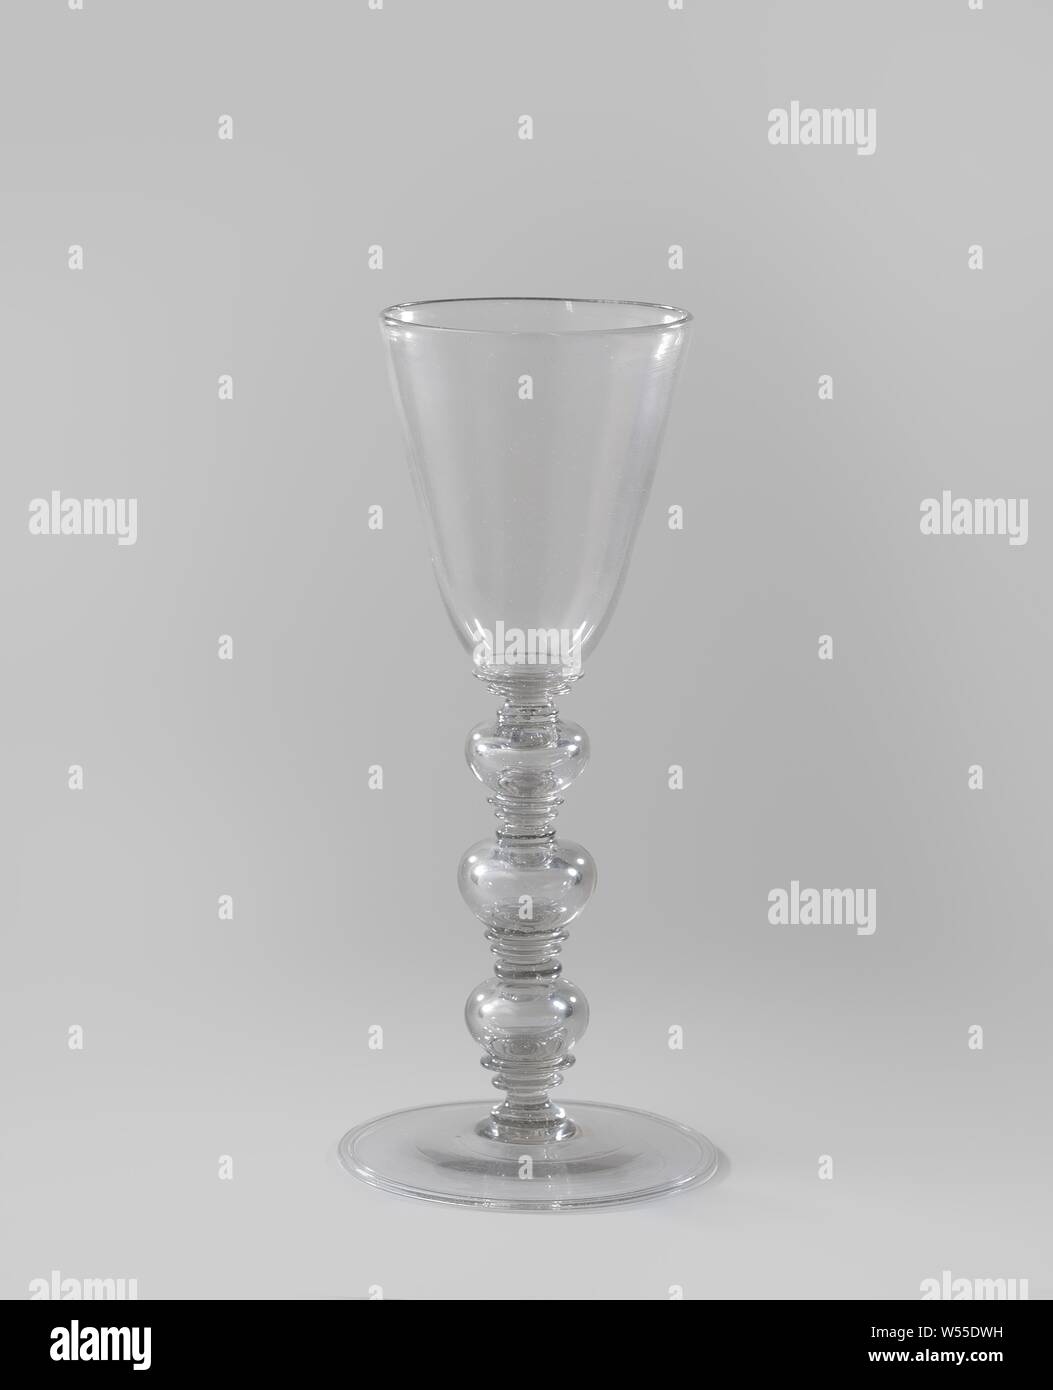 Cup with three hollow balusters, Cup of clear gray tinted glass. Flat base with folded edge. Stem made up of three hollow nodes between four times three discs. Funnel-shaped chalice rounded at the bottom., anonymous, Netherlands, c. 1650 - c. 1700, glass, glassblowing, h 28.3 cm × d 12.5 cm Stock Photo